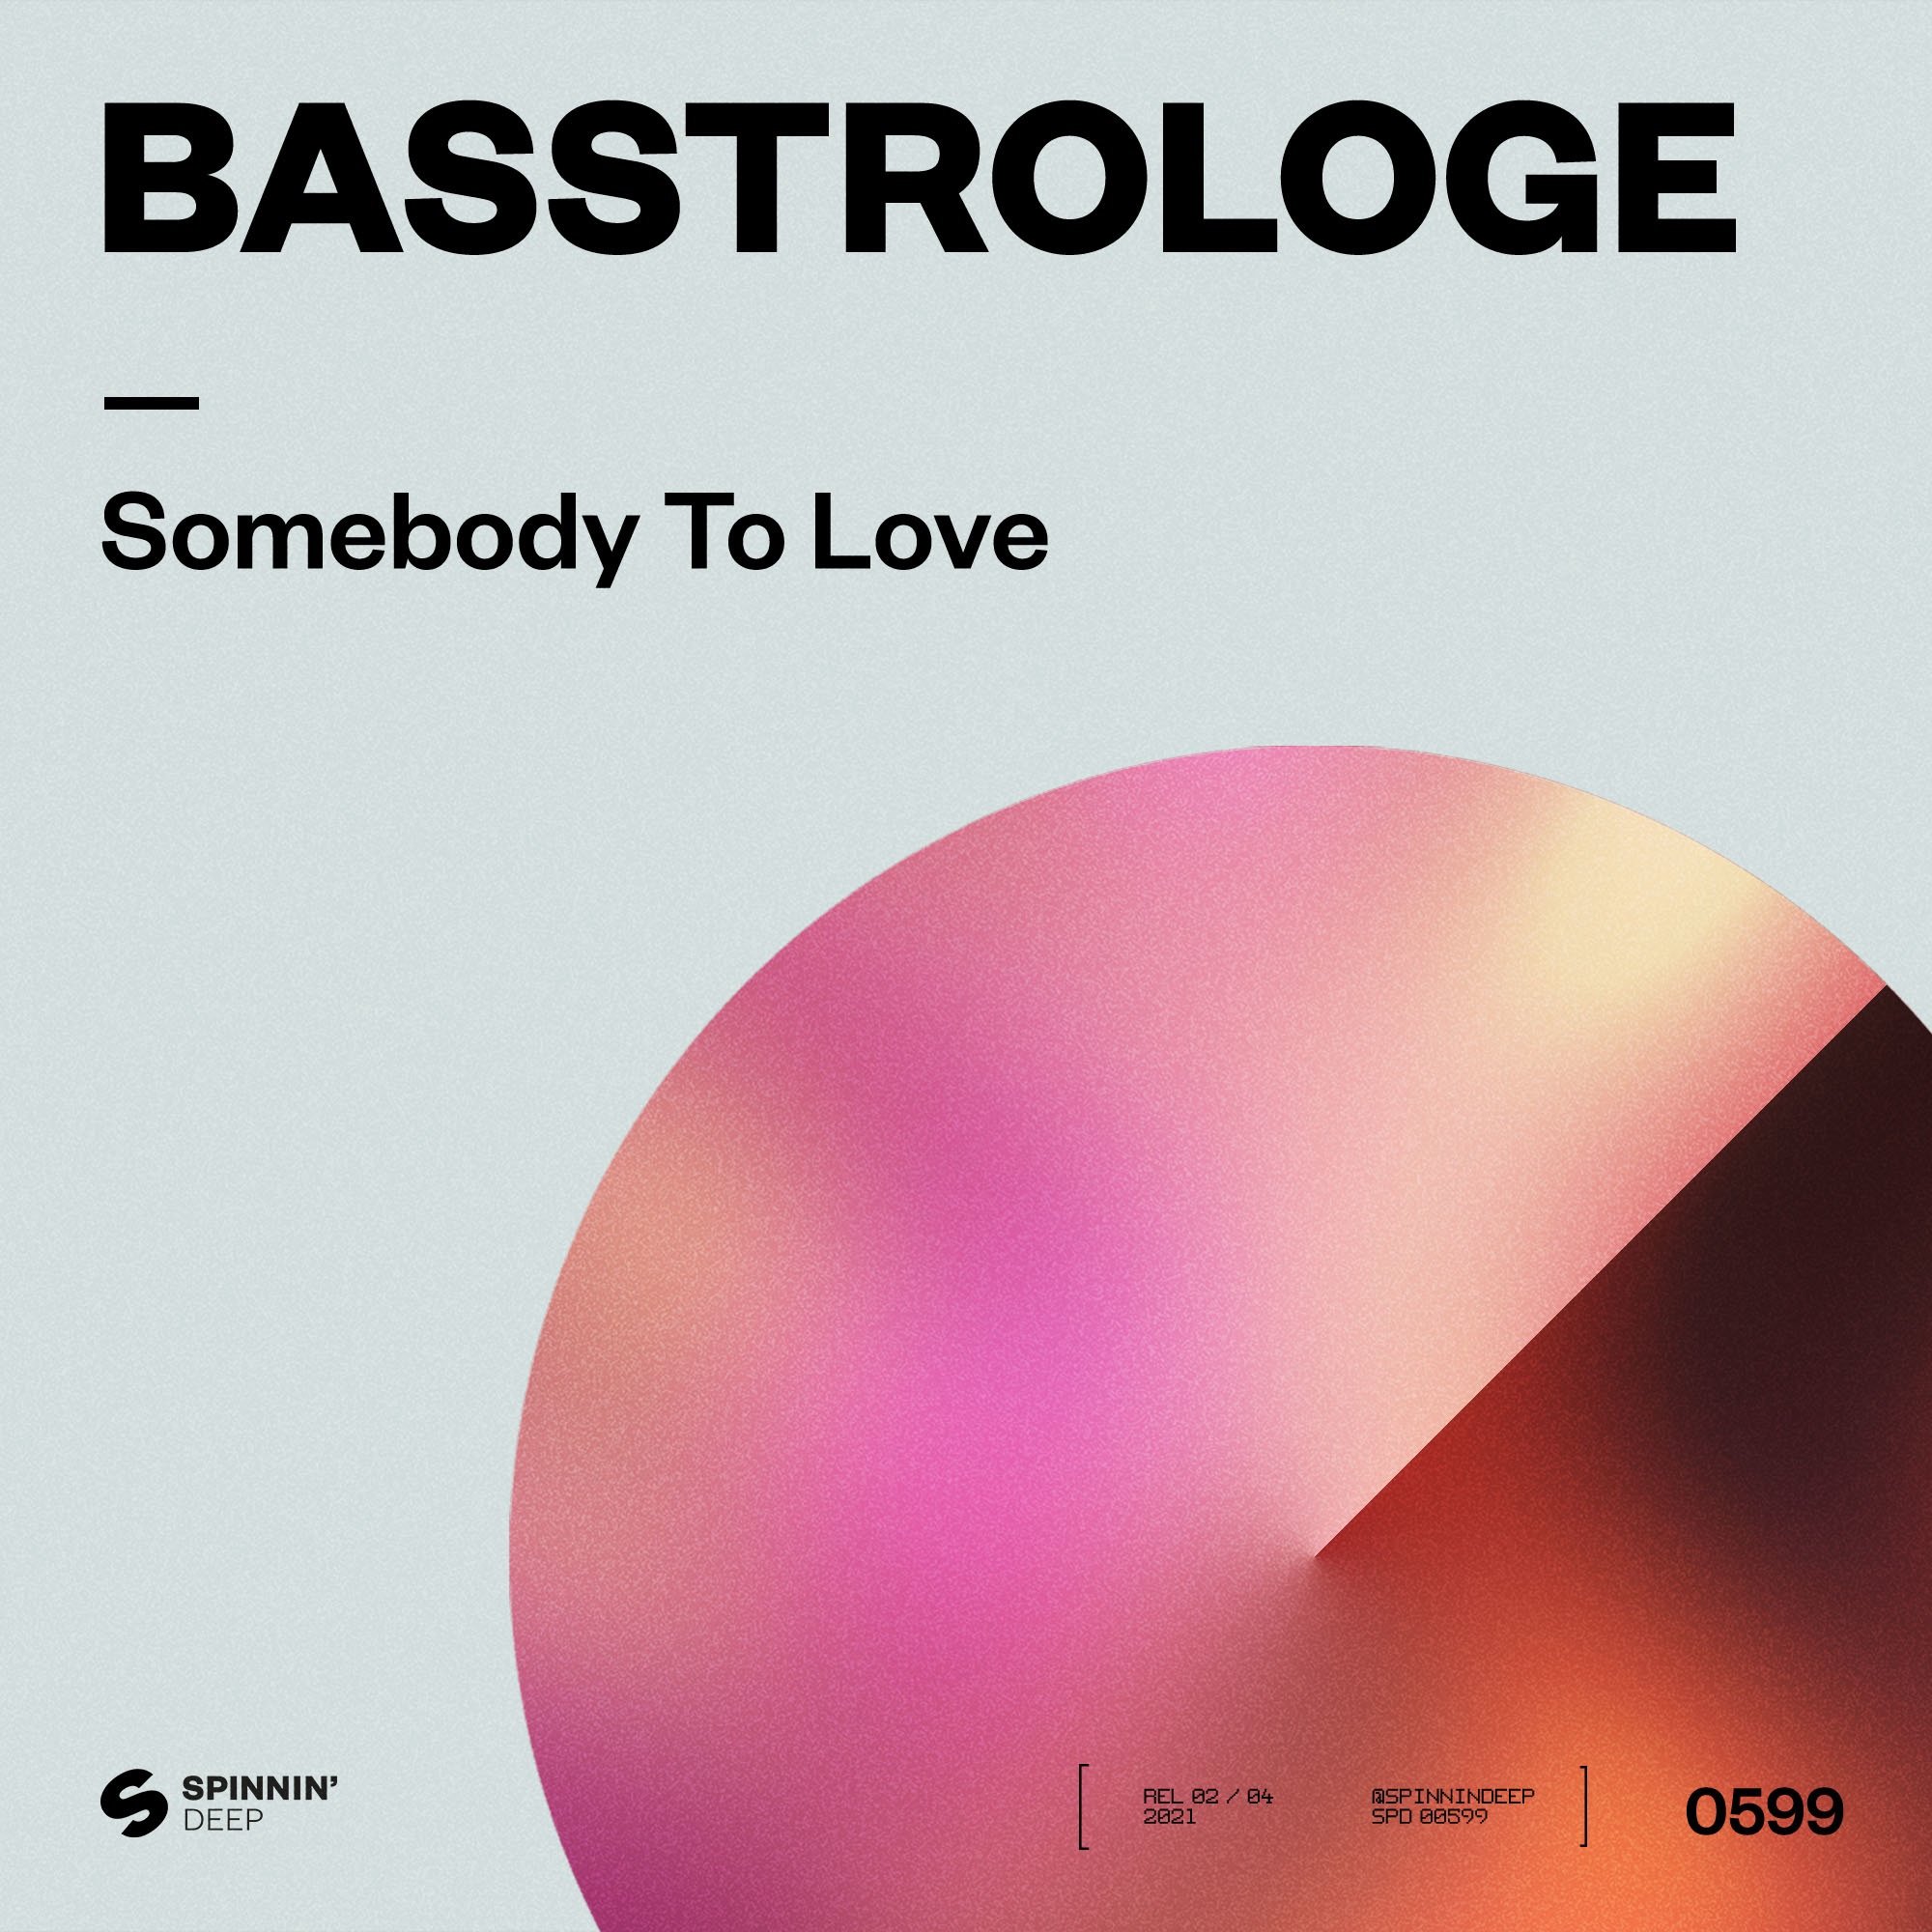 Need somebody to love. Basstrologe. Somebody to Love. Somebody to Love Jefferson. Basstrologe группа.